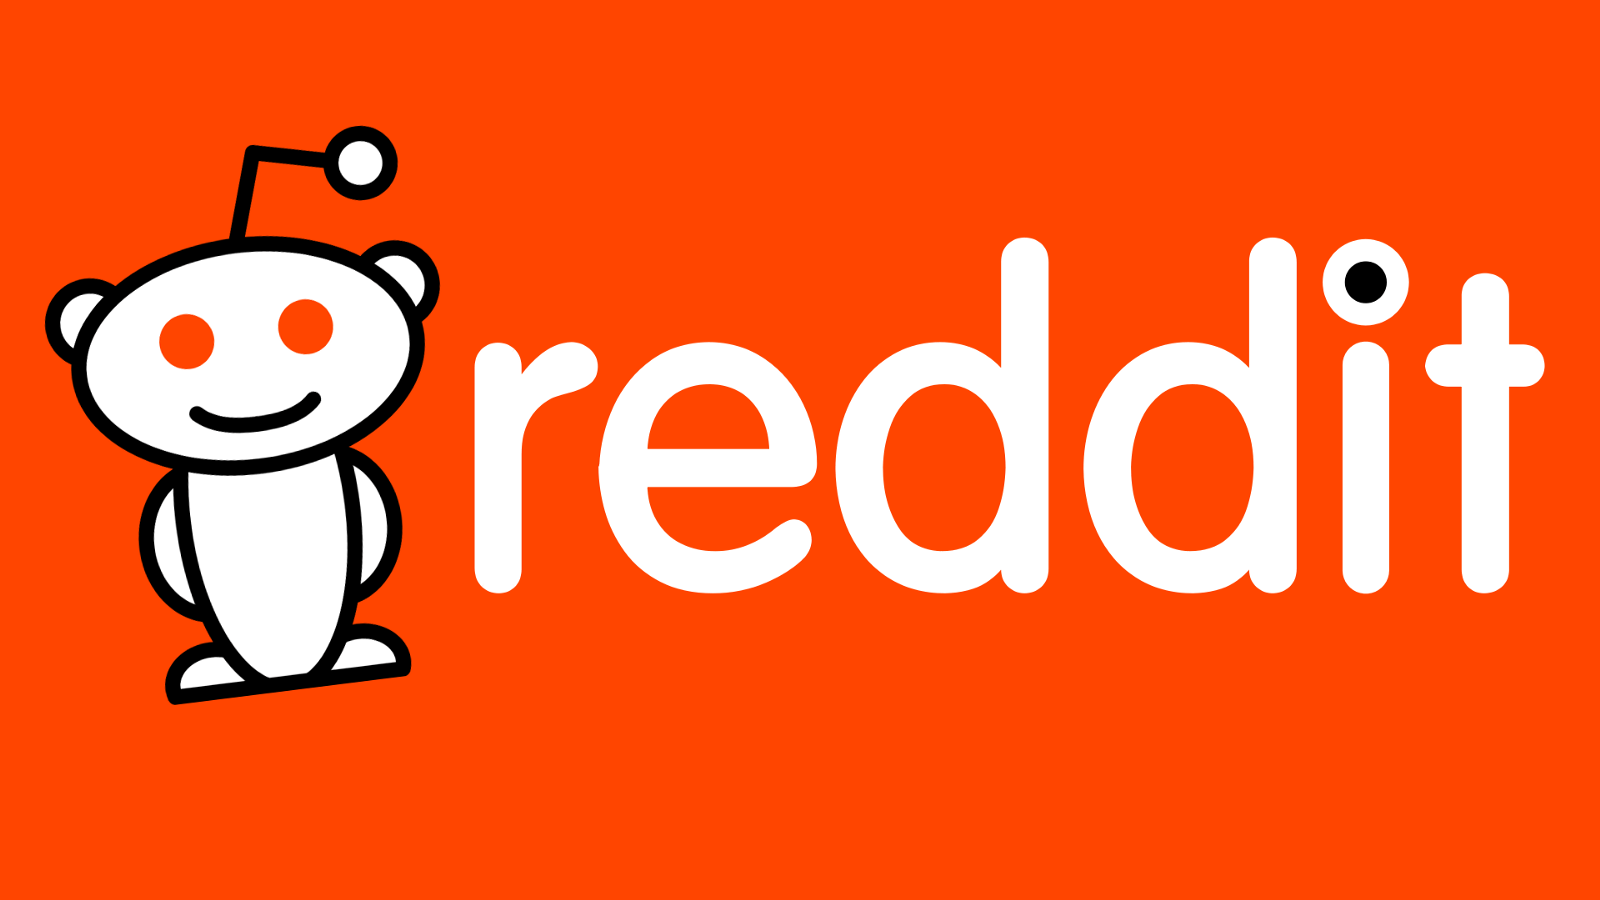 Reddit users are almost worthless compared to other social networks